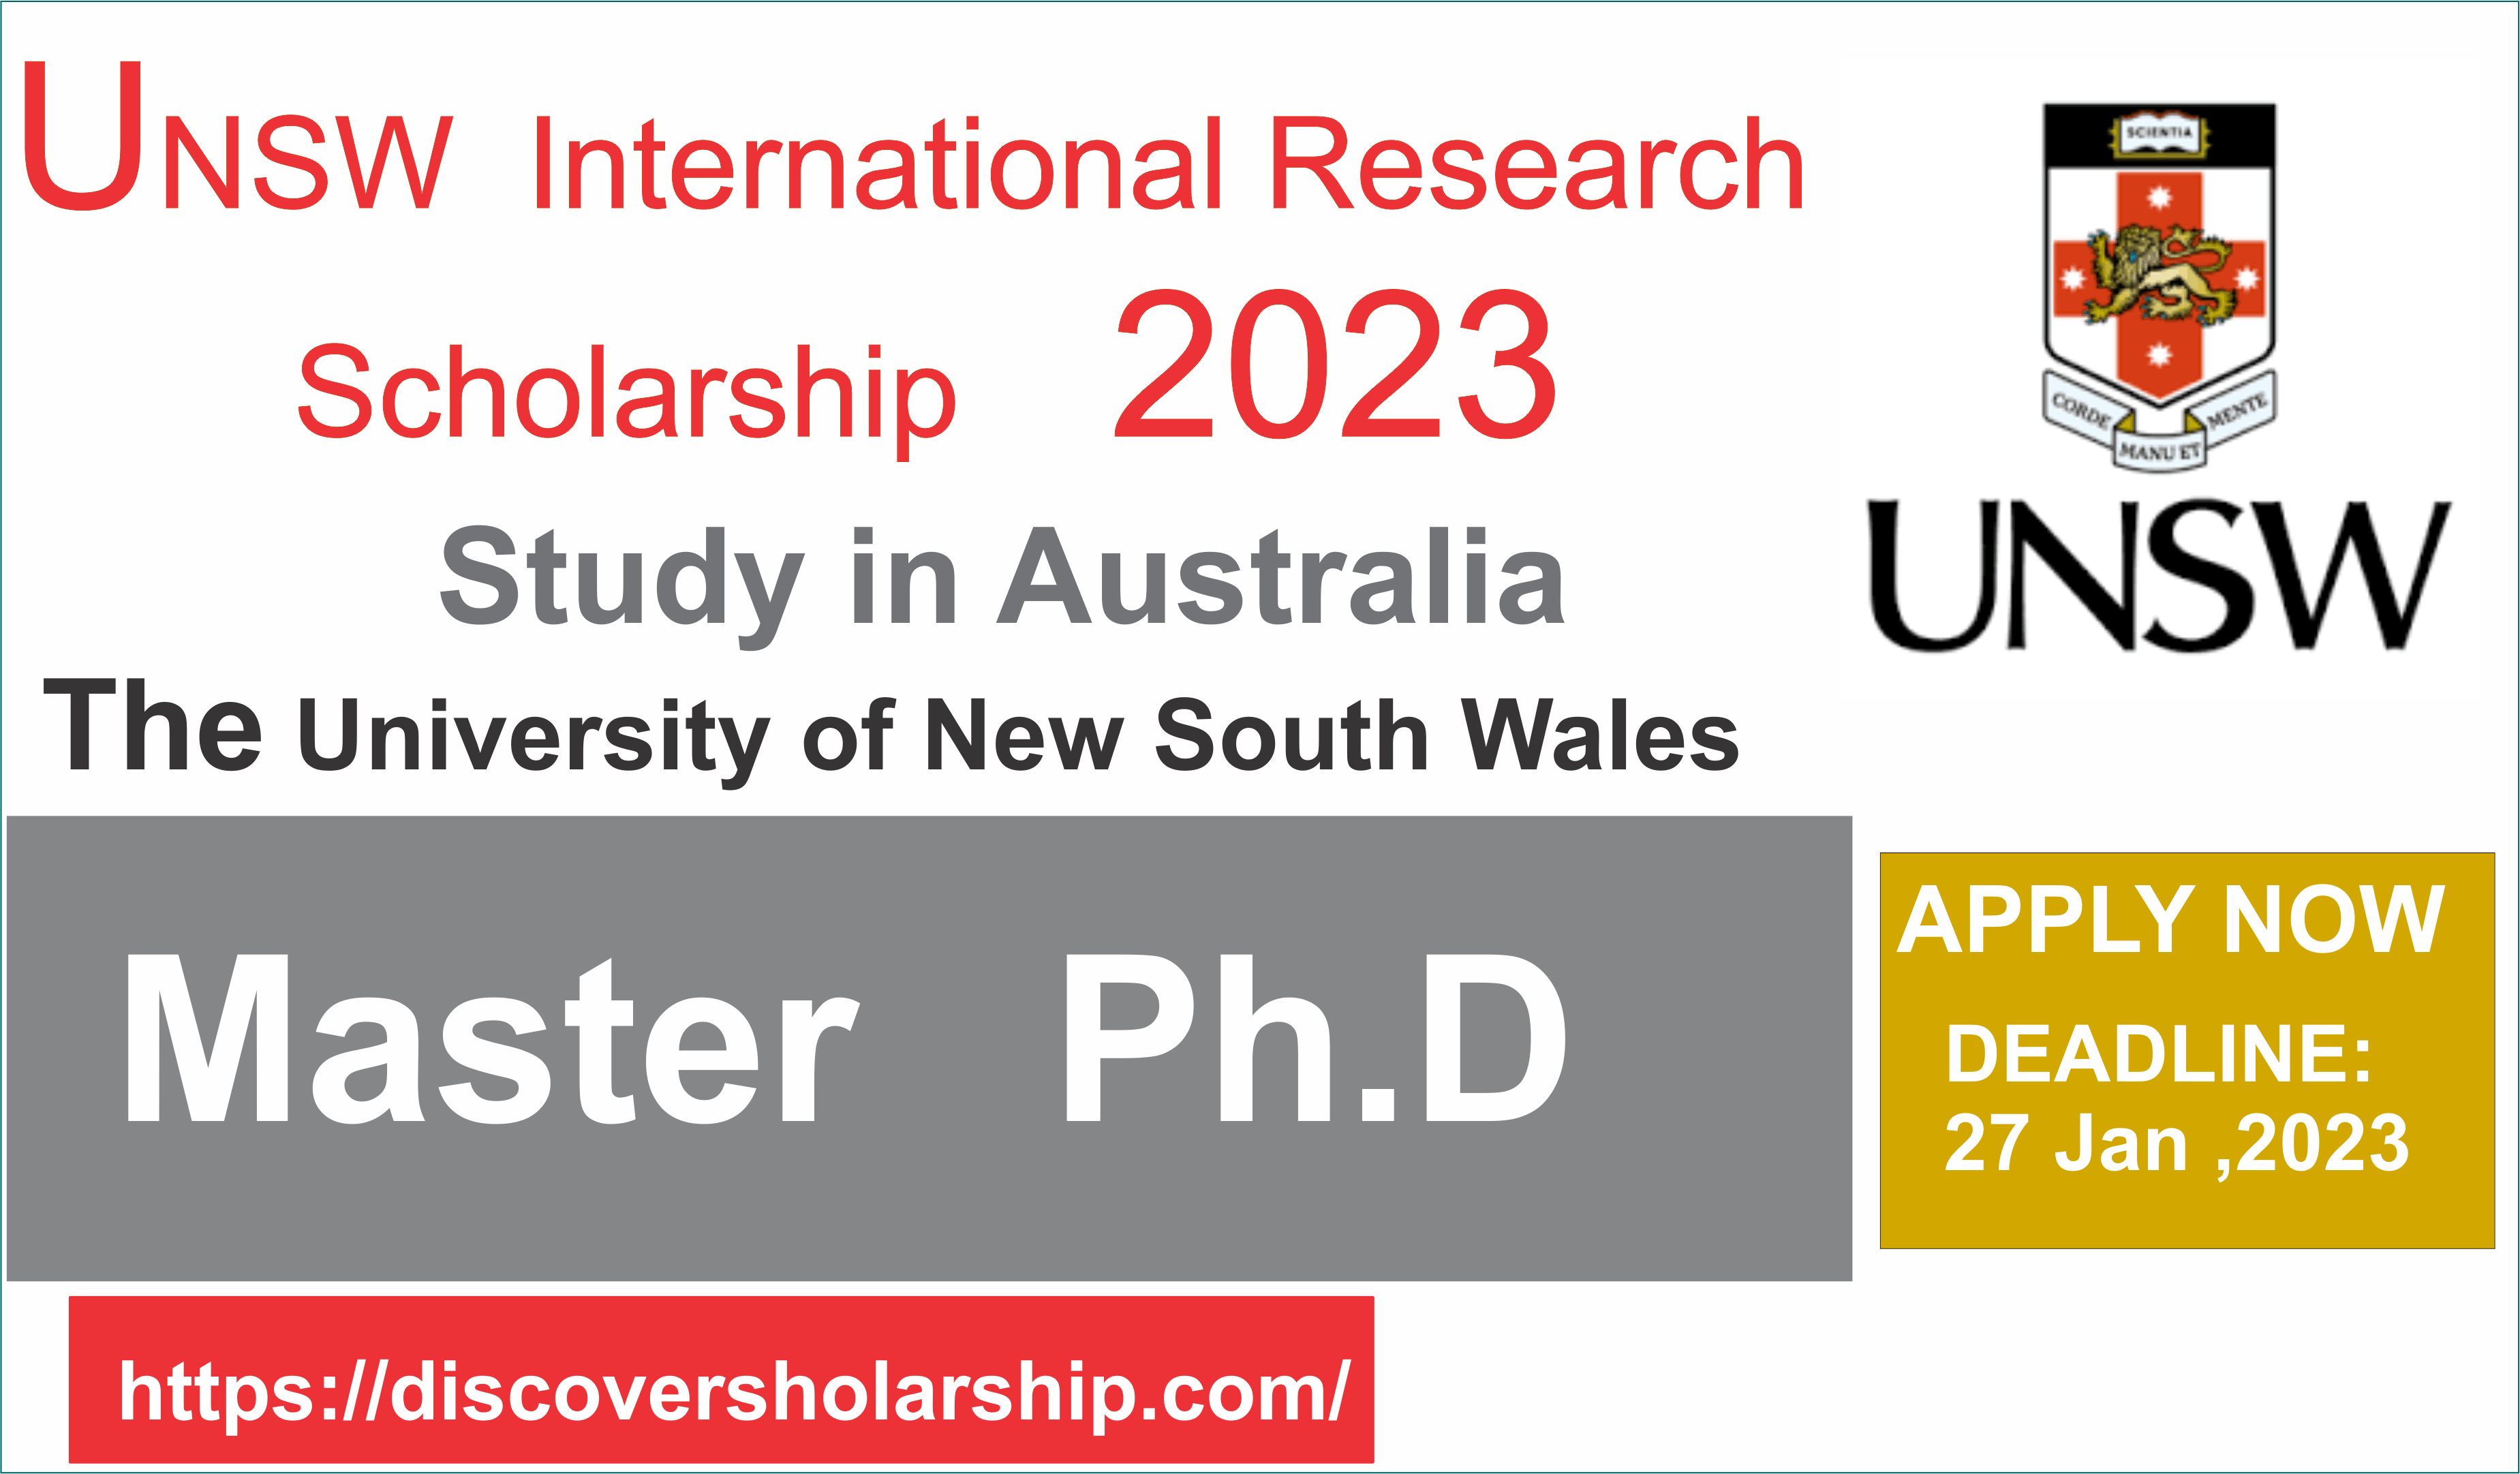 UNSW International Research Scholarships 2023